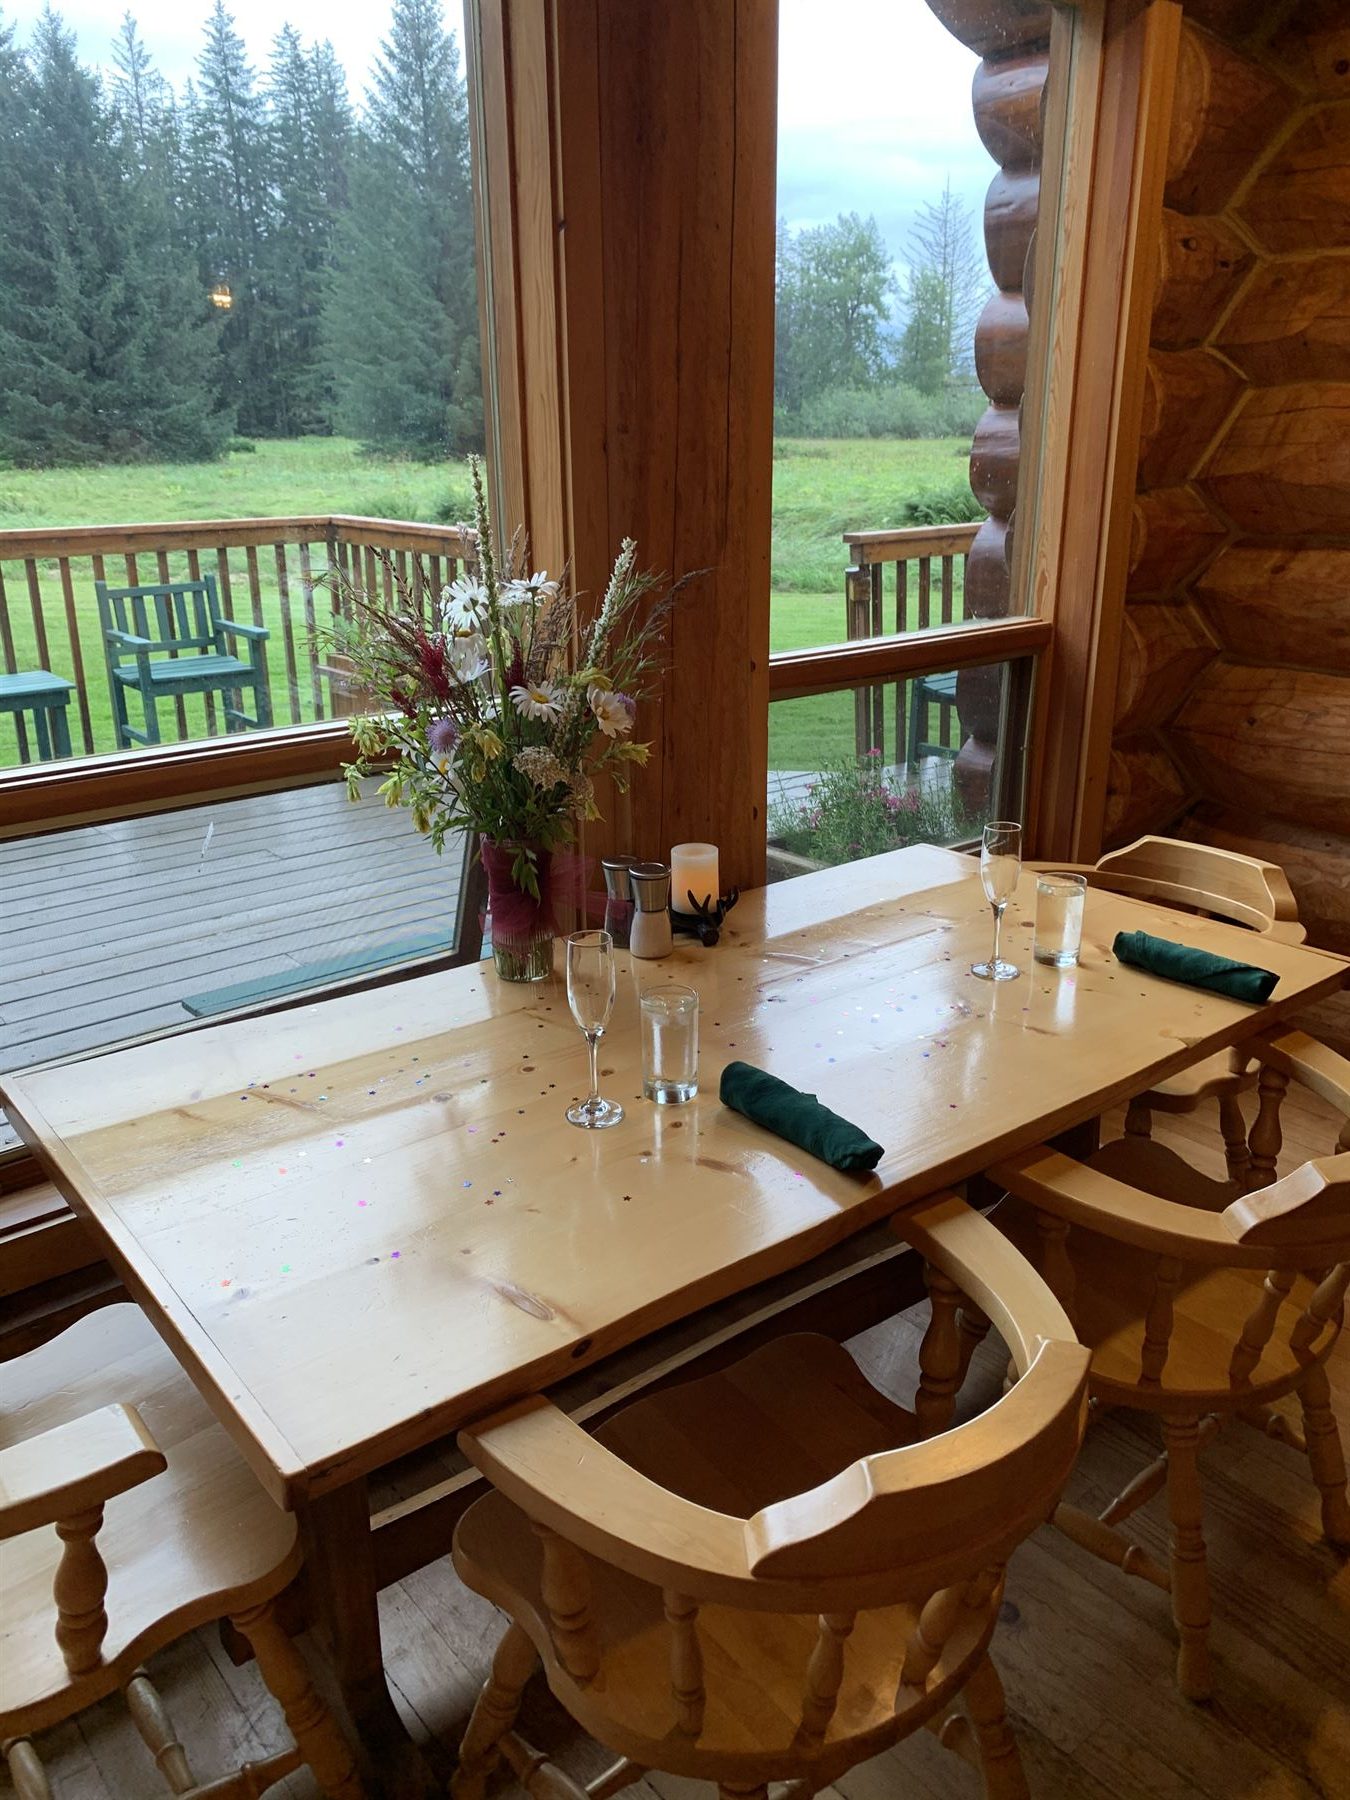 Dining table with view to deck at the Bear Track Inn